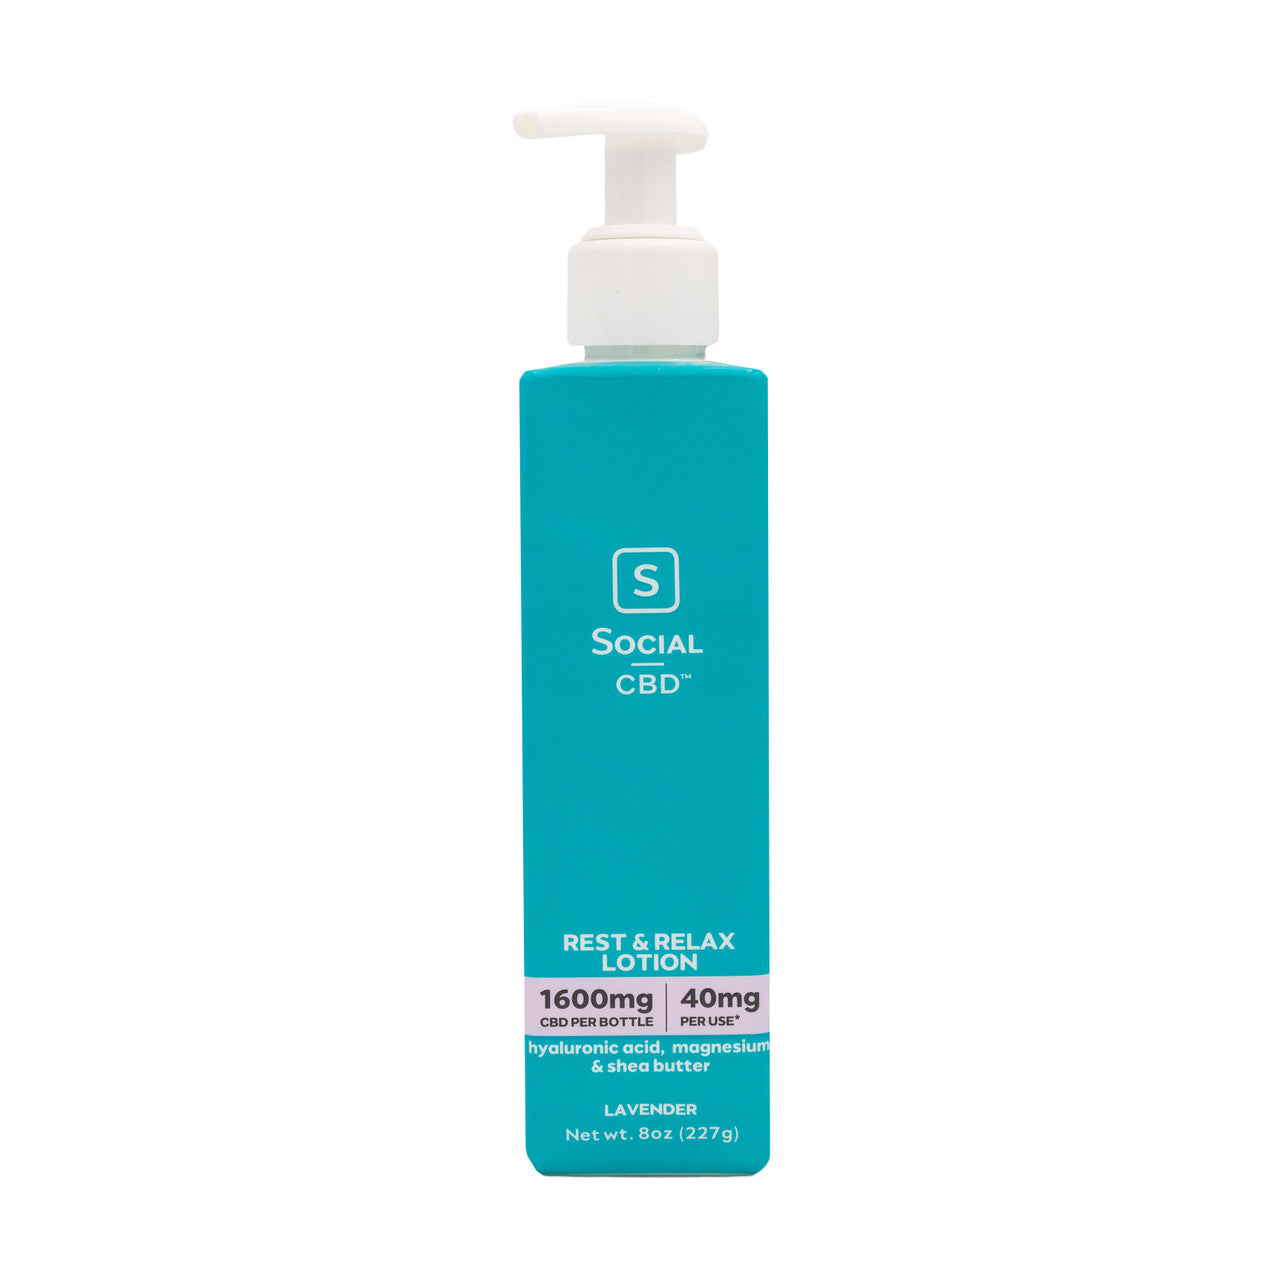 Rest & Relax CBD Body Lotion - 1600mg